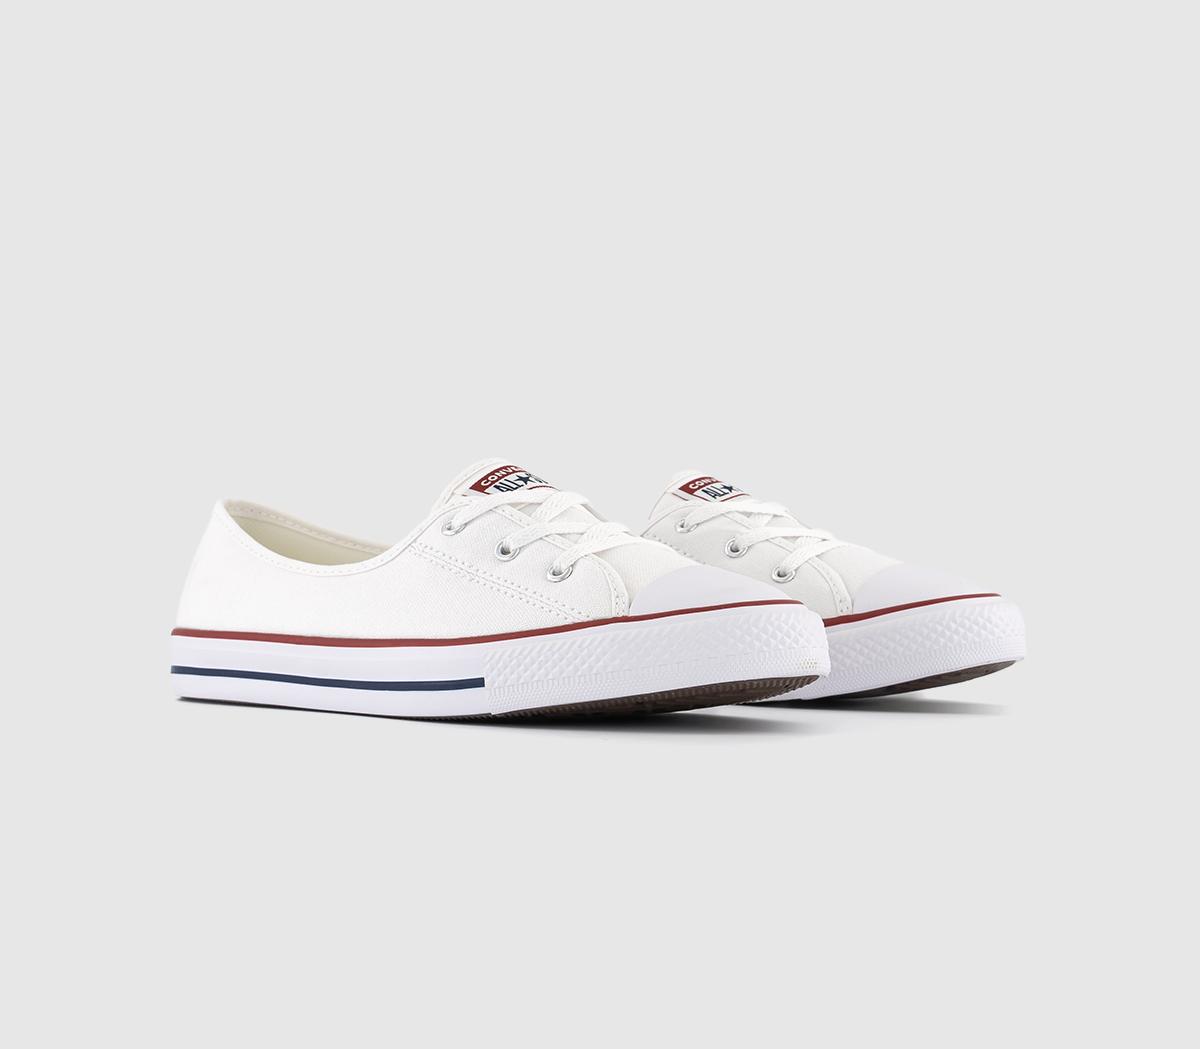 Converse Kids Ladies Ctas Ballet Lace In White/red/blue, 4.5